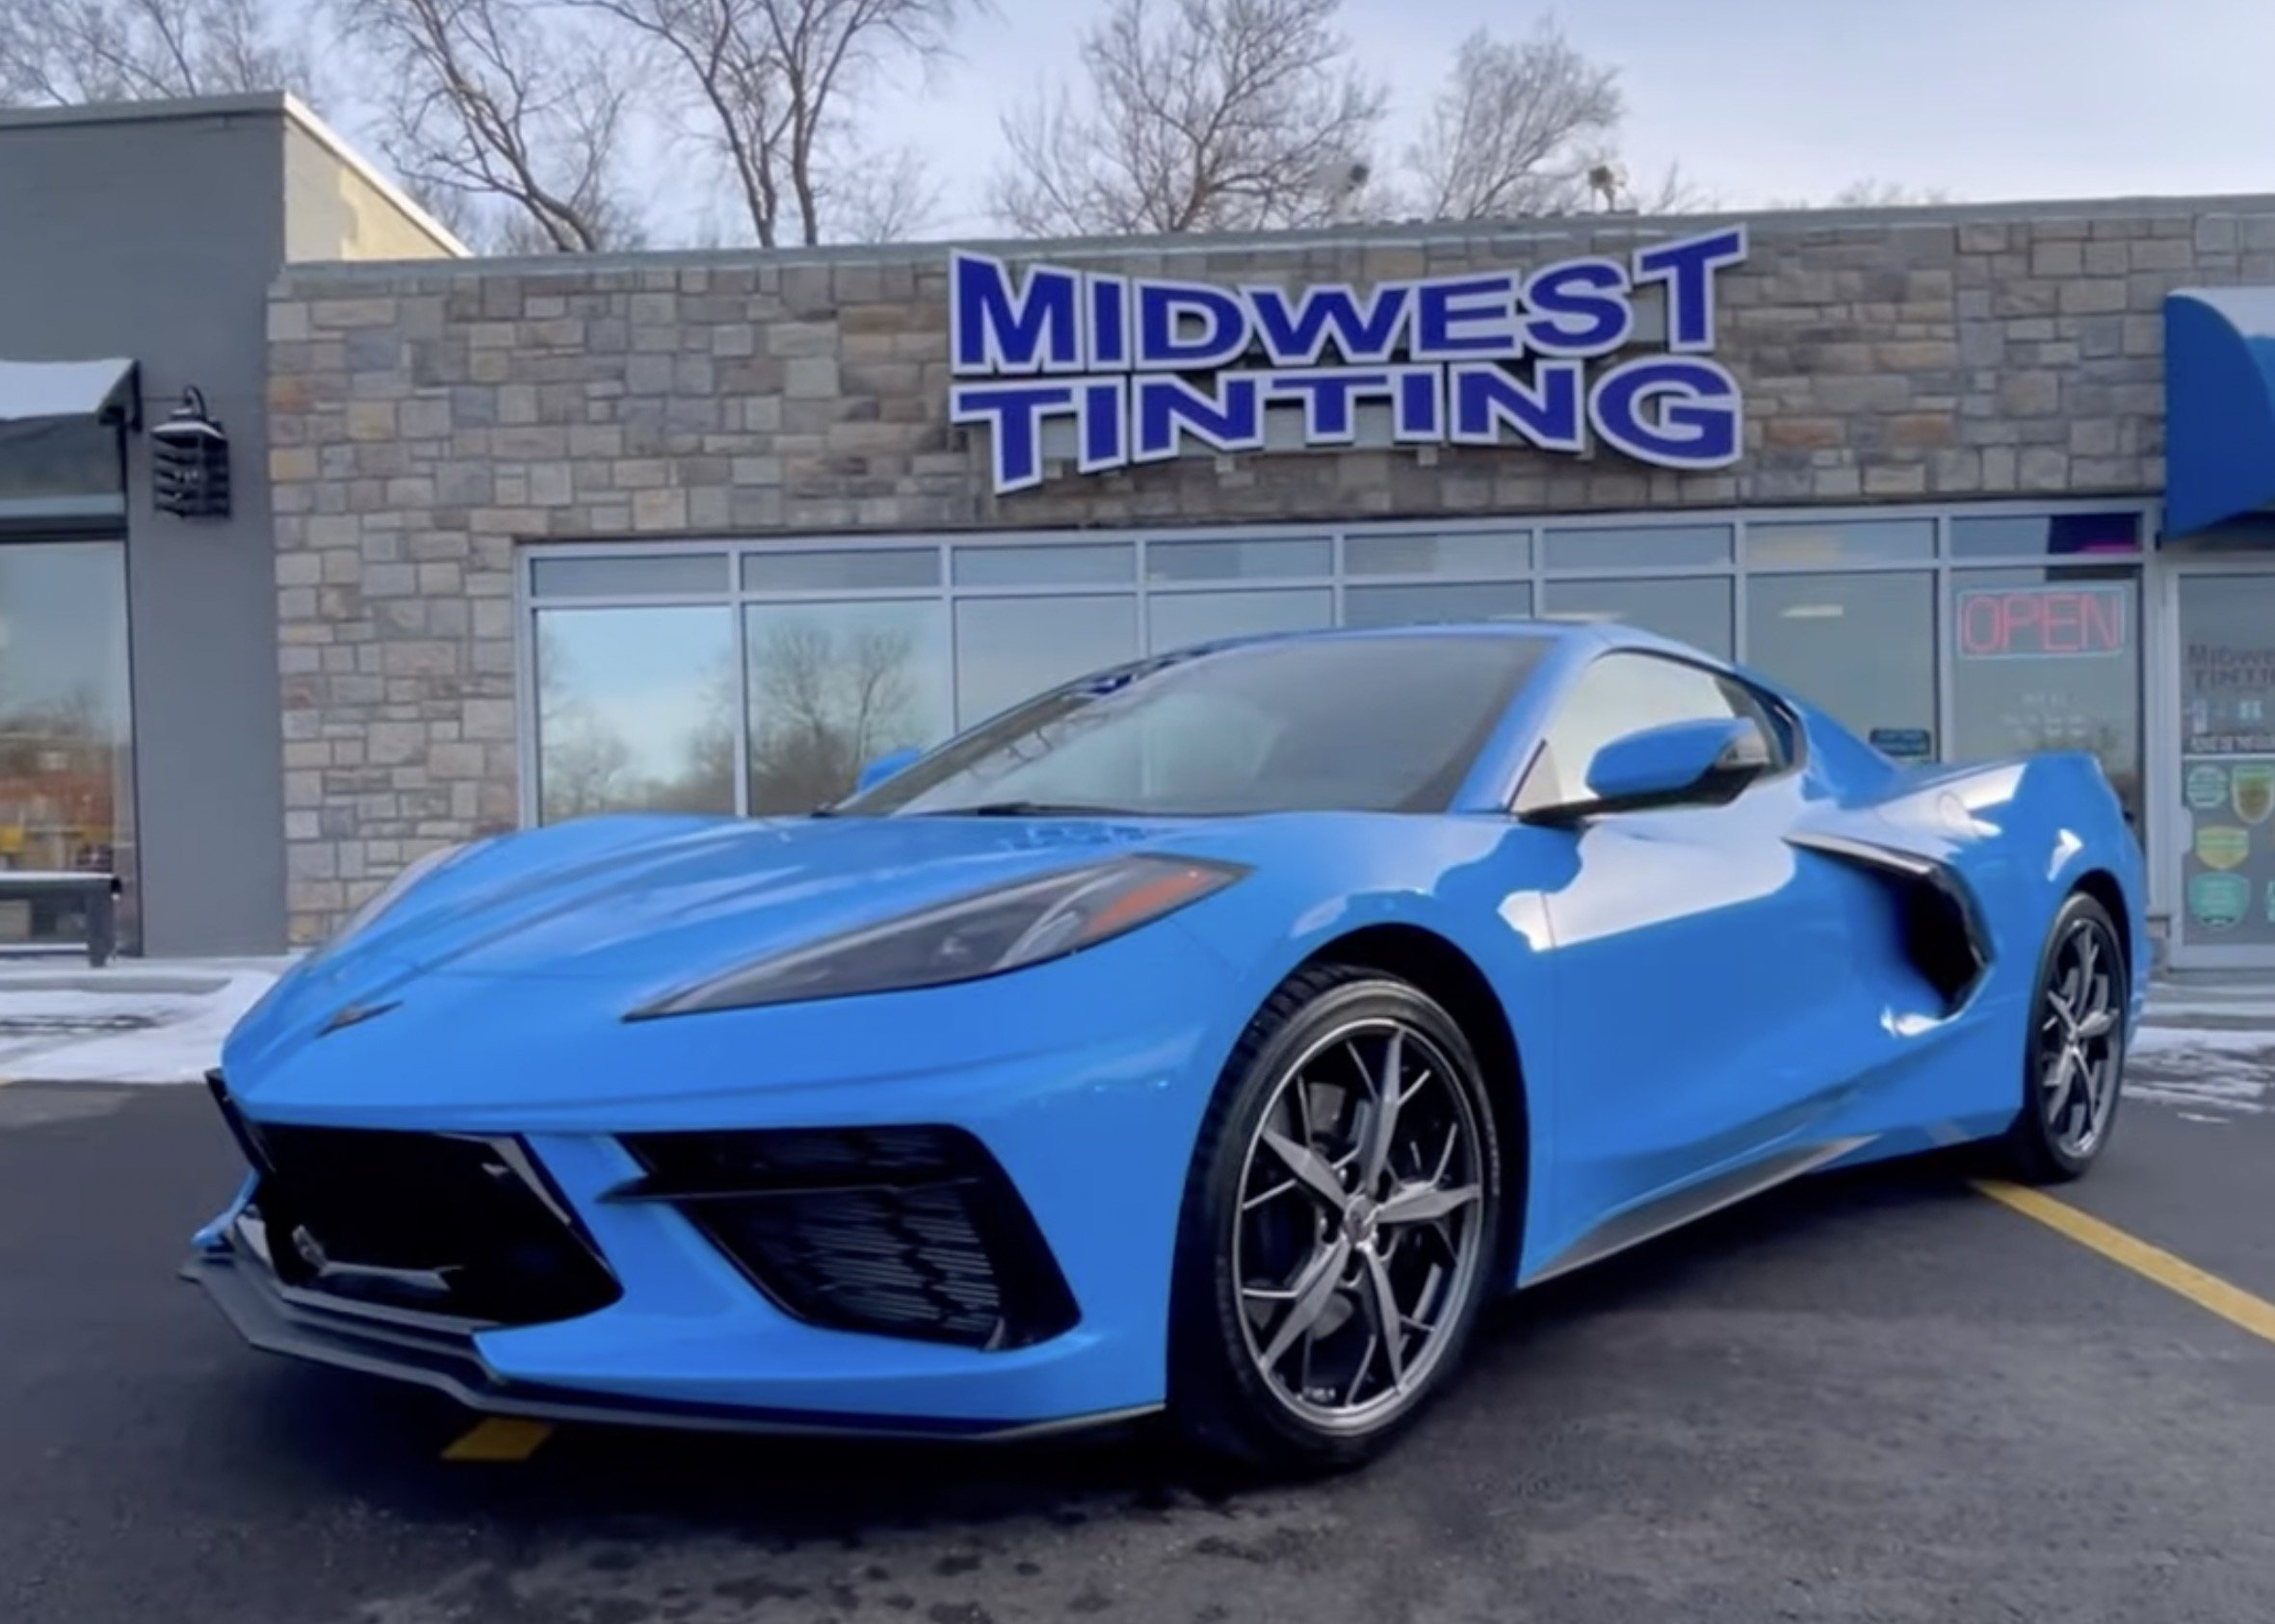 Premium Protection Package at Midwest Tinting for 2022 Chevy Corvette - Window Tinting, Paint Protection Film and Ceramic paint Coating in Kansas City